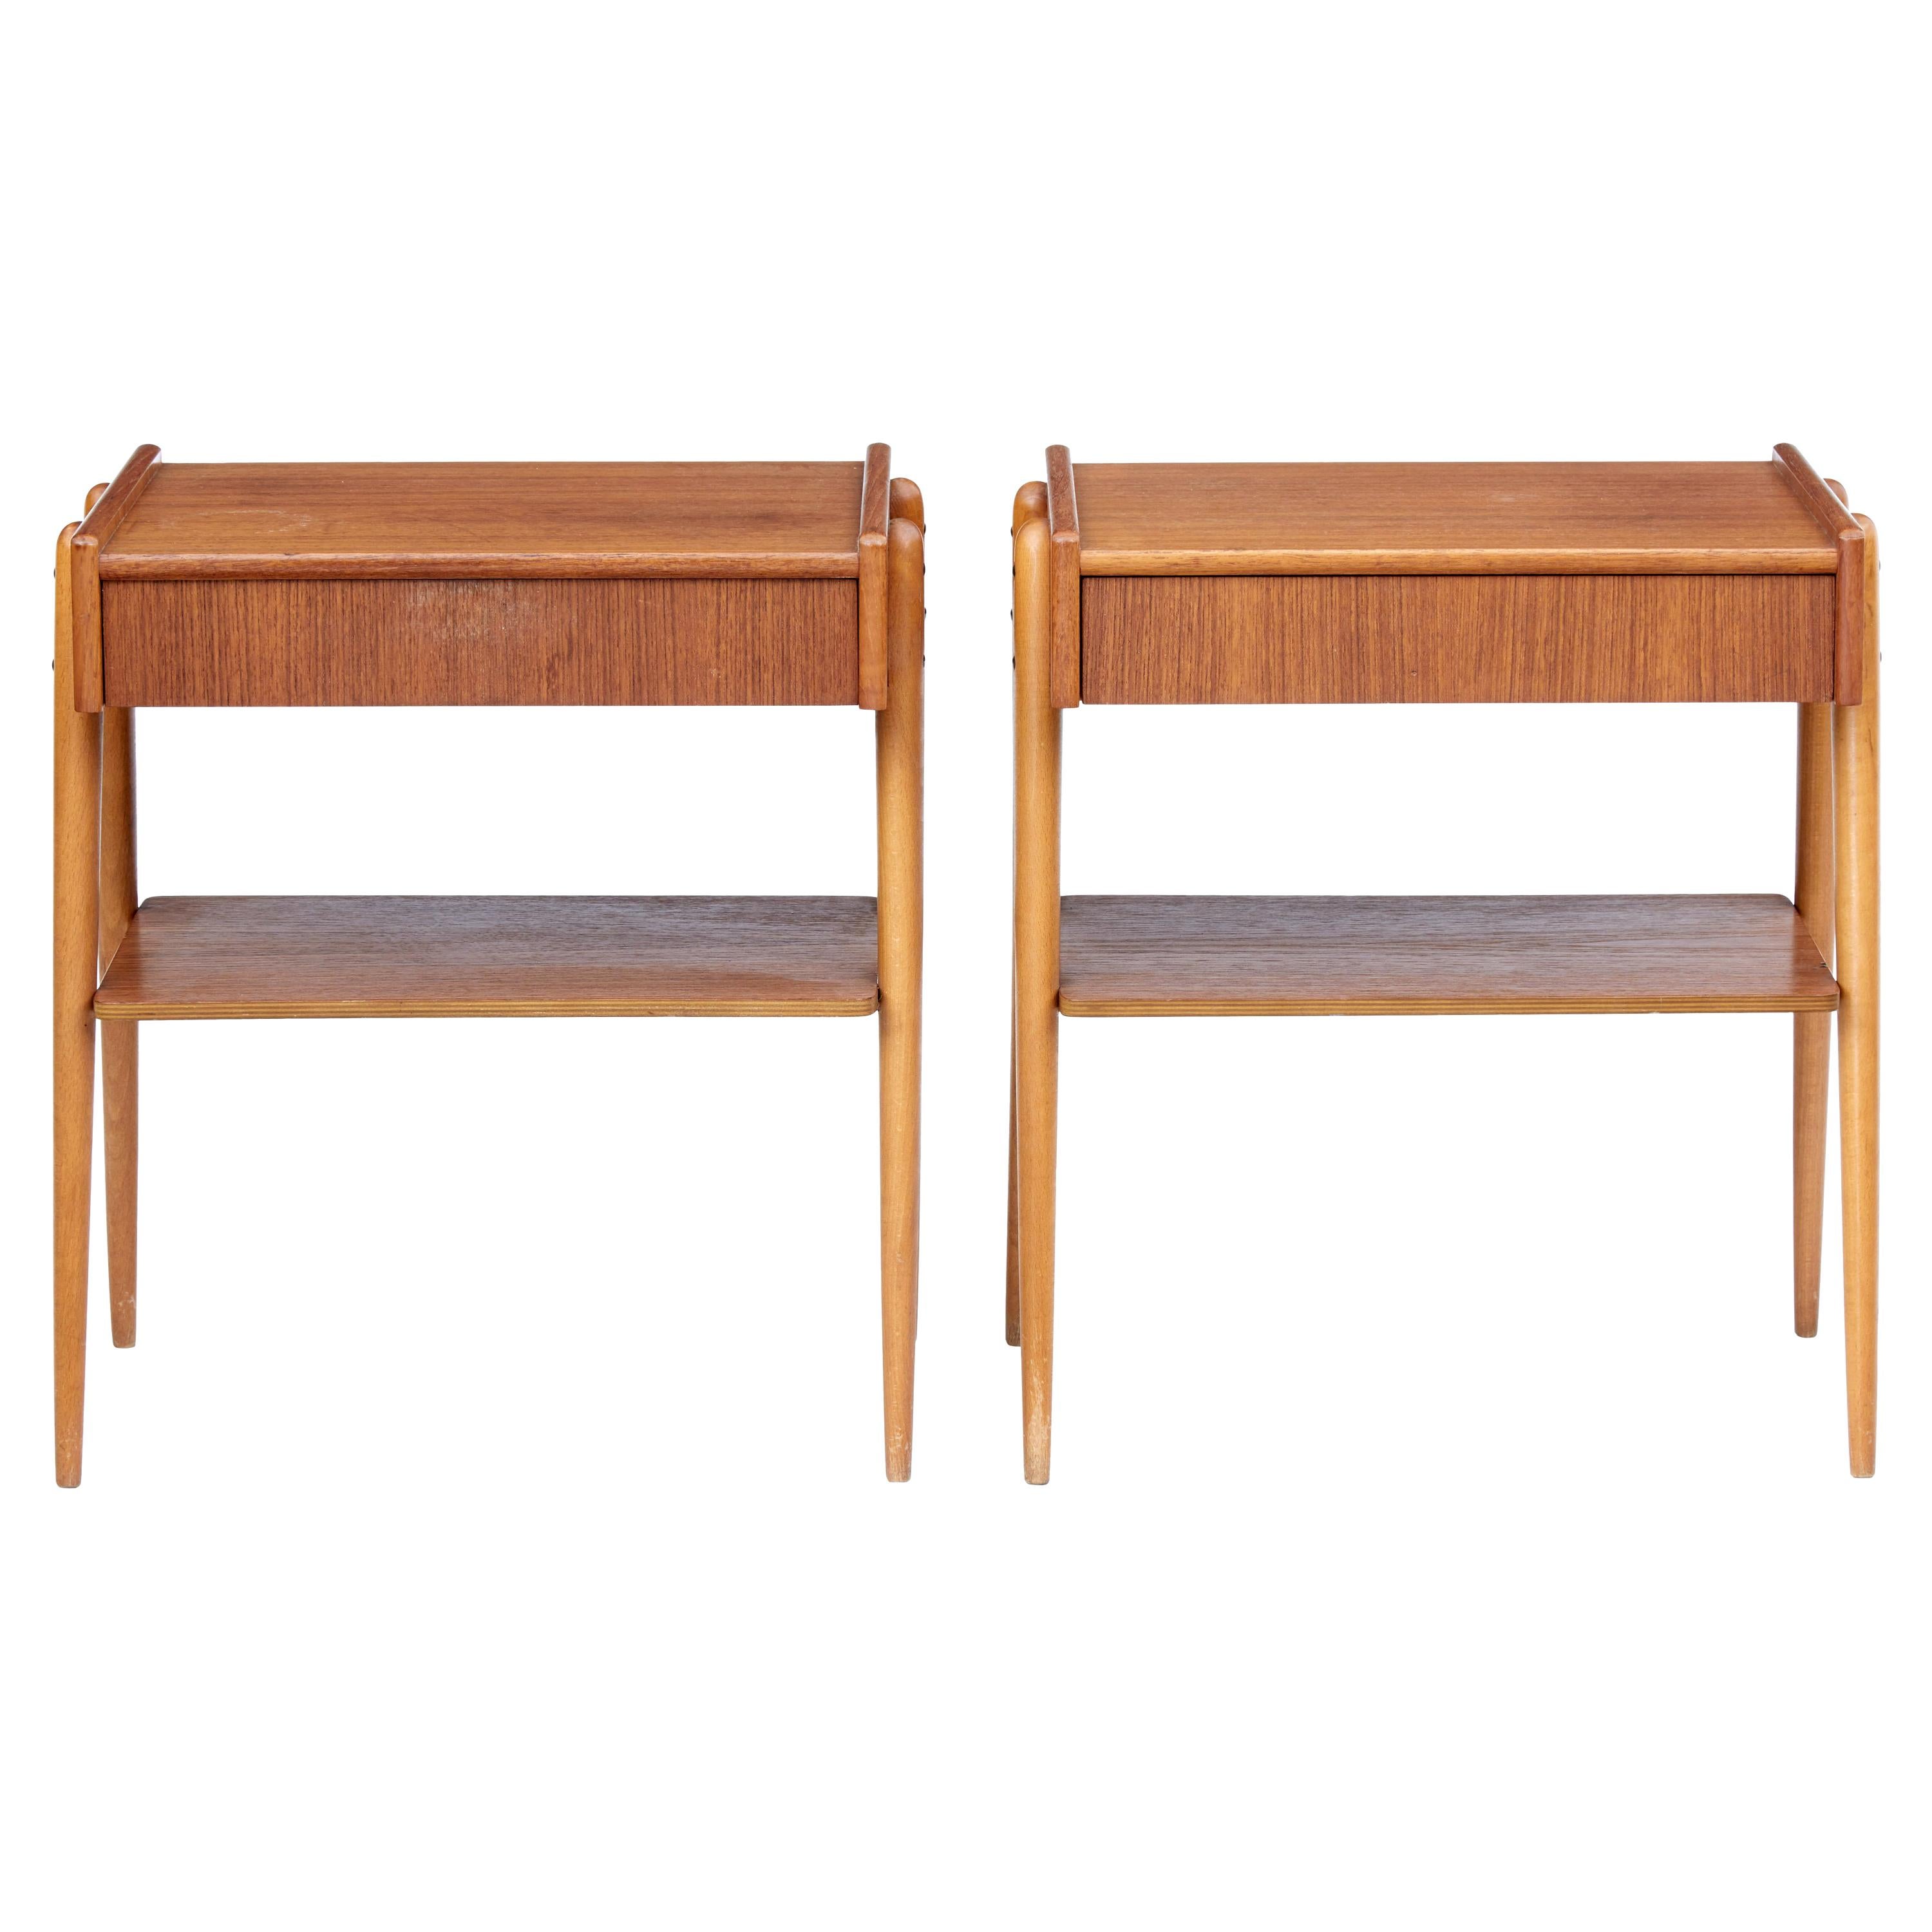 Pair of Teak Bedside Tables by AB Carlstron